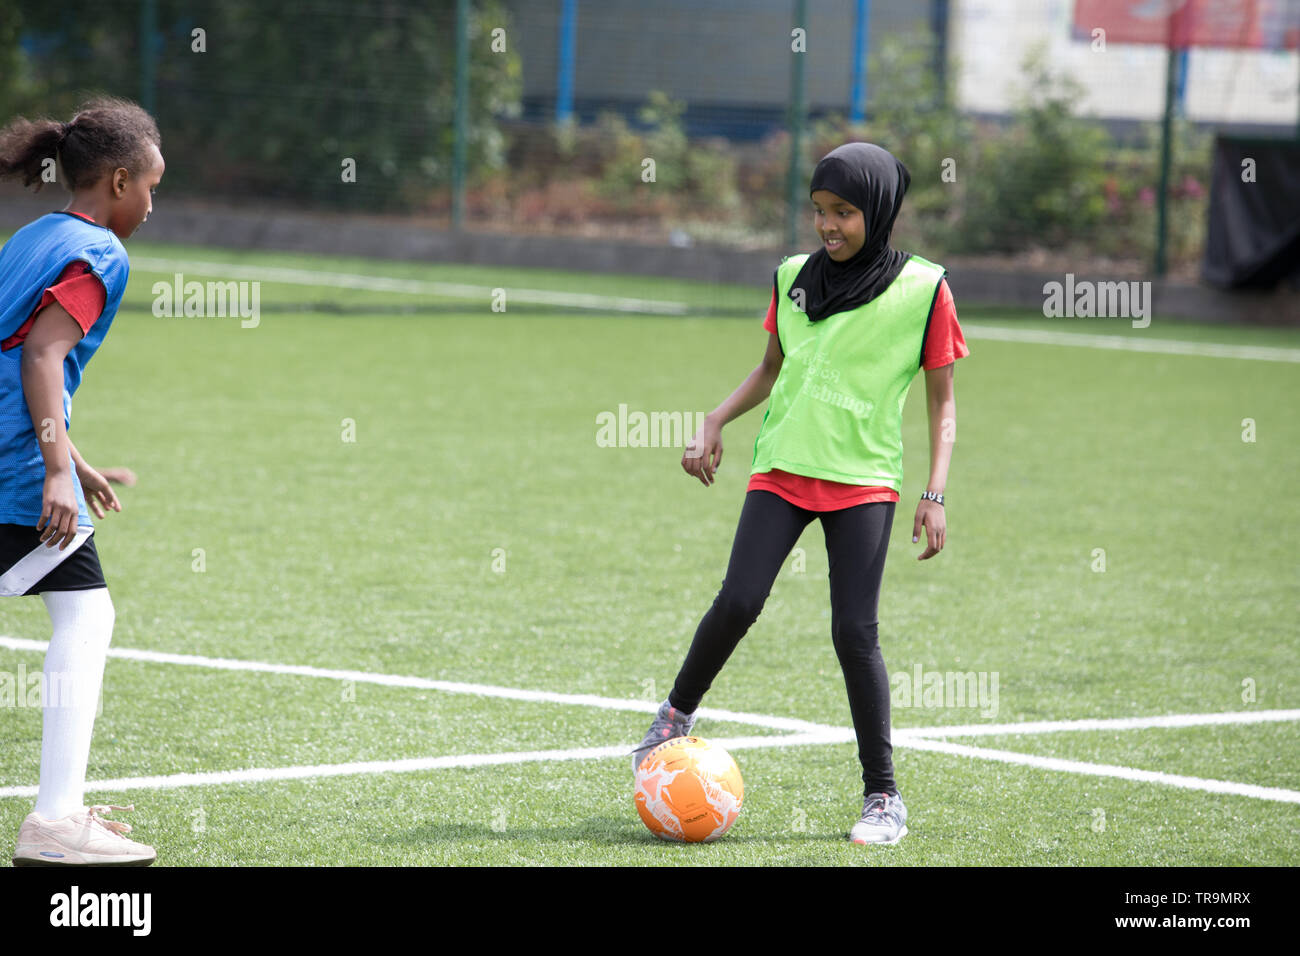 Muslim girls playing football on an astroturf training pitch. Some are wearing hijabs (headscarves). Stock Photo